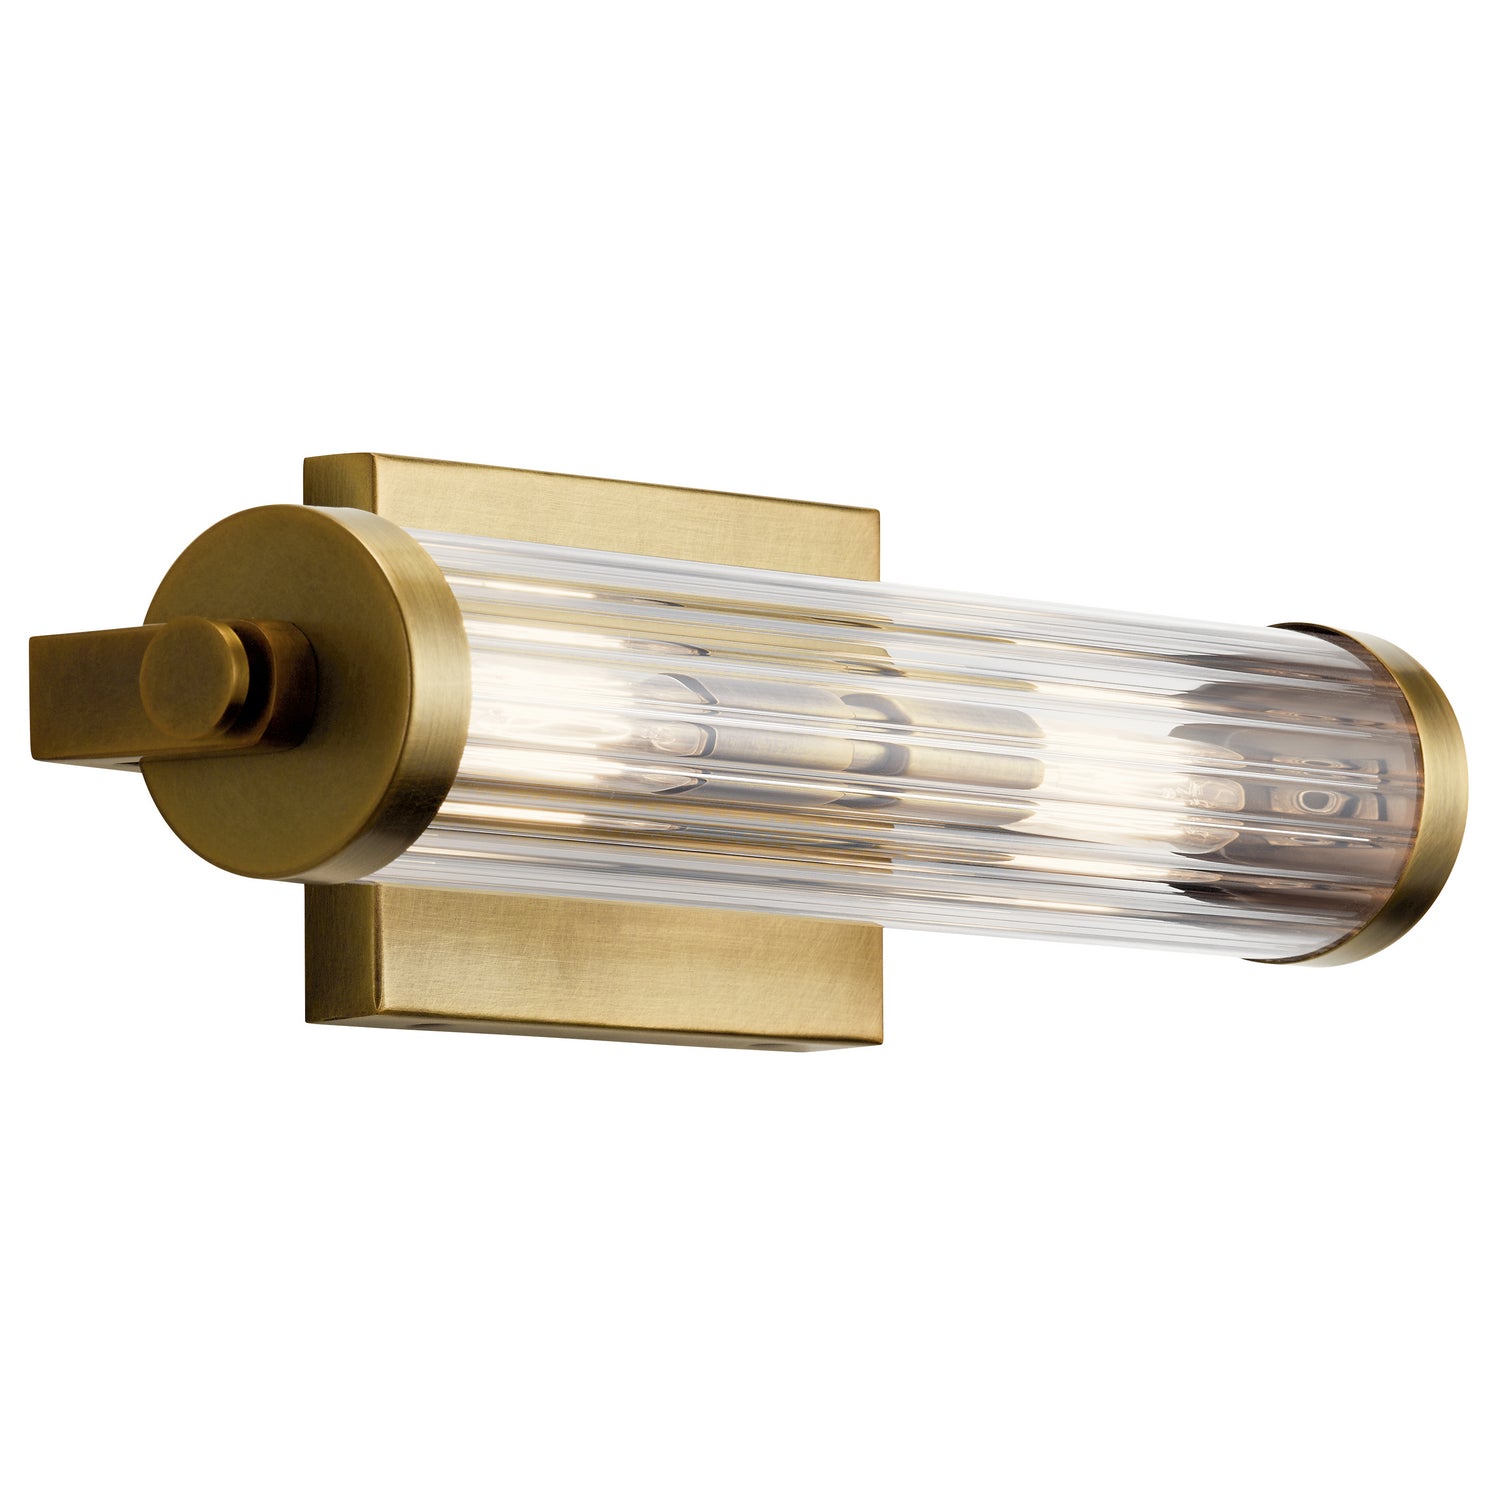 Kichler Canada - Two Light Wall Sconce - Azores - Natural Brass- Union Lighting Luminaires Decor